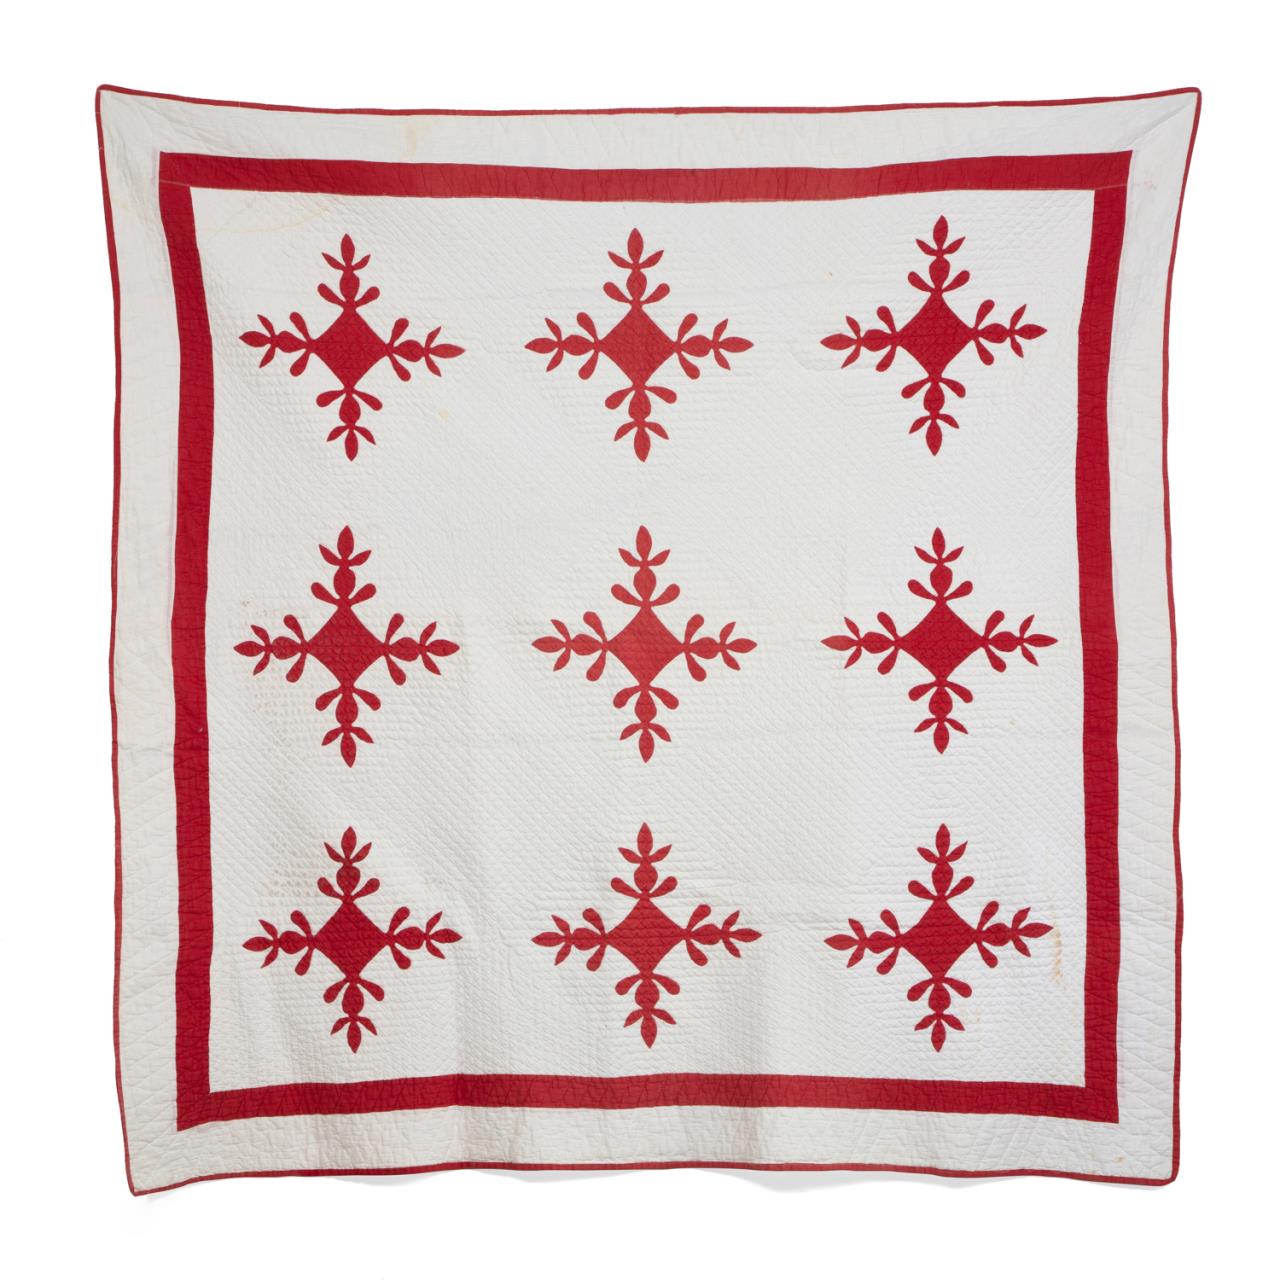 HAND QUILTED RED AND WHITE APPLIQUE